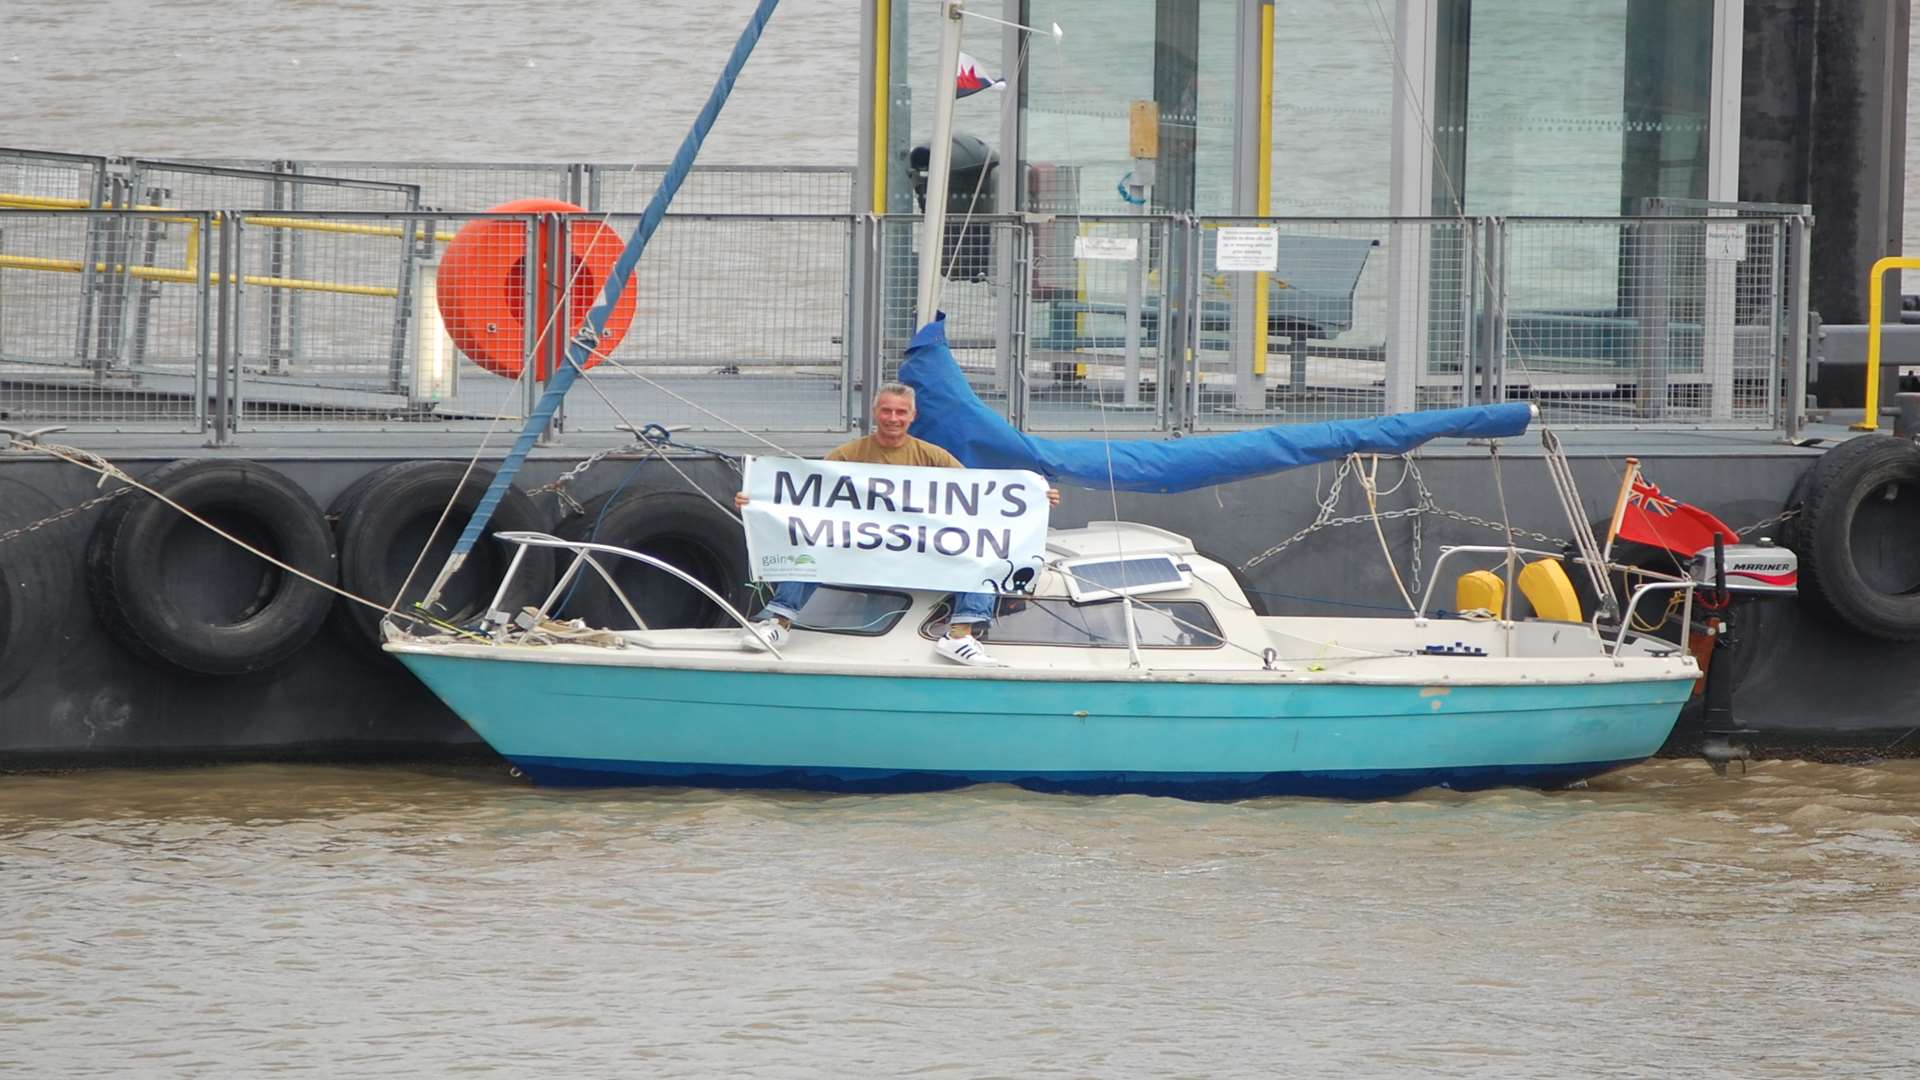 His boat is named Marlin, after his home town in Essex.